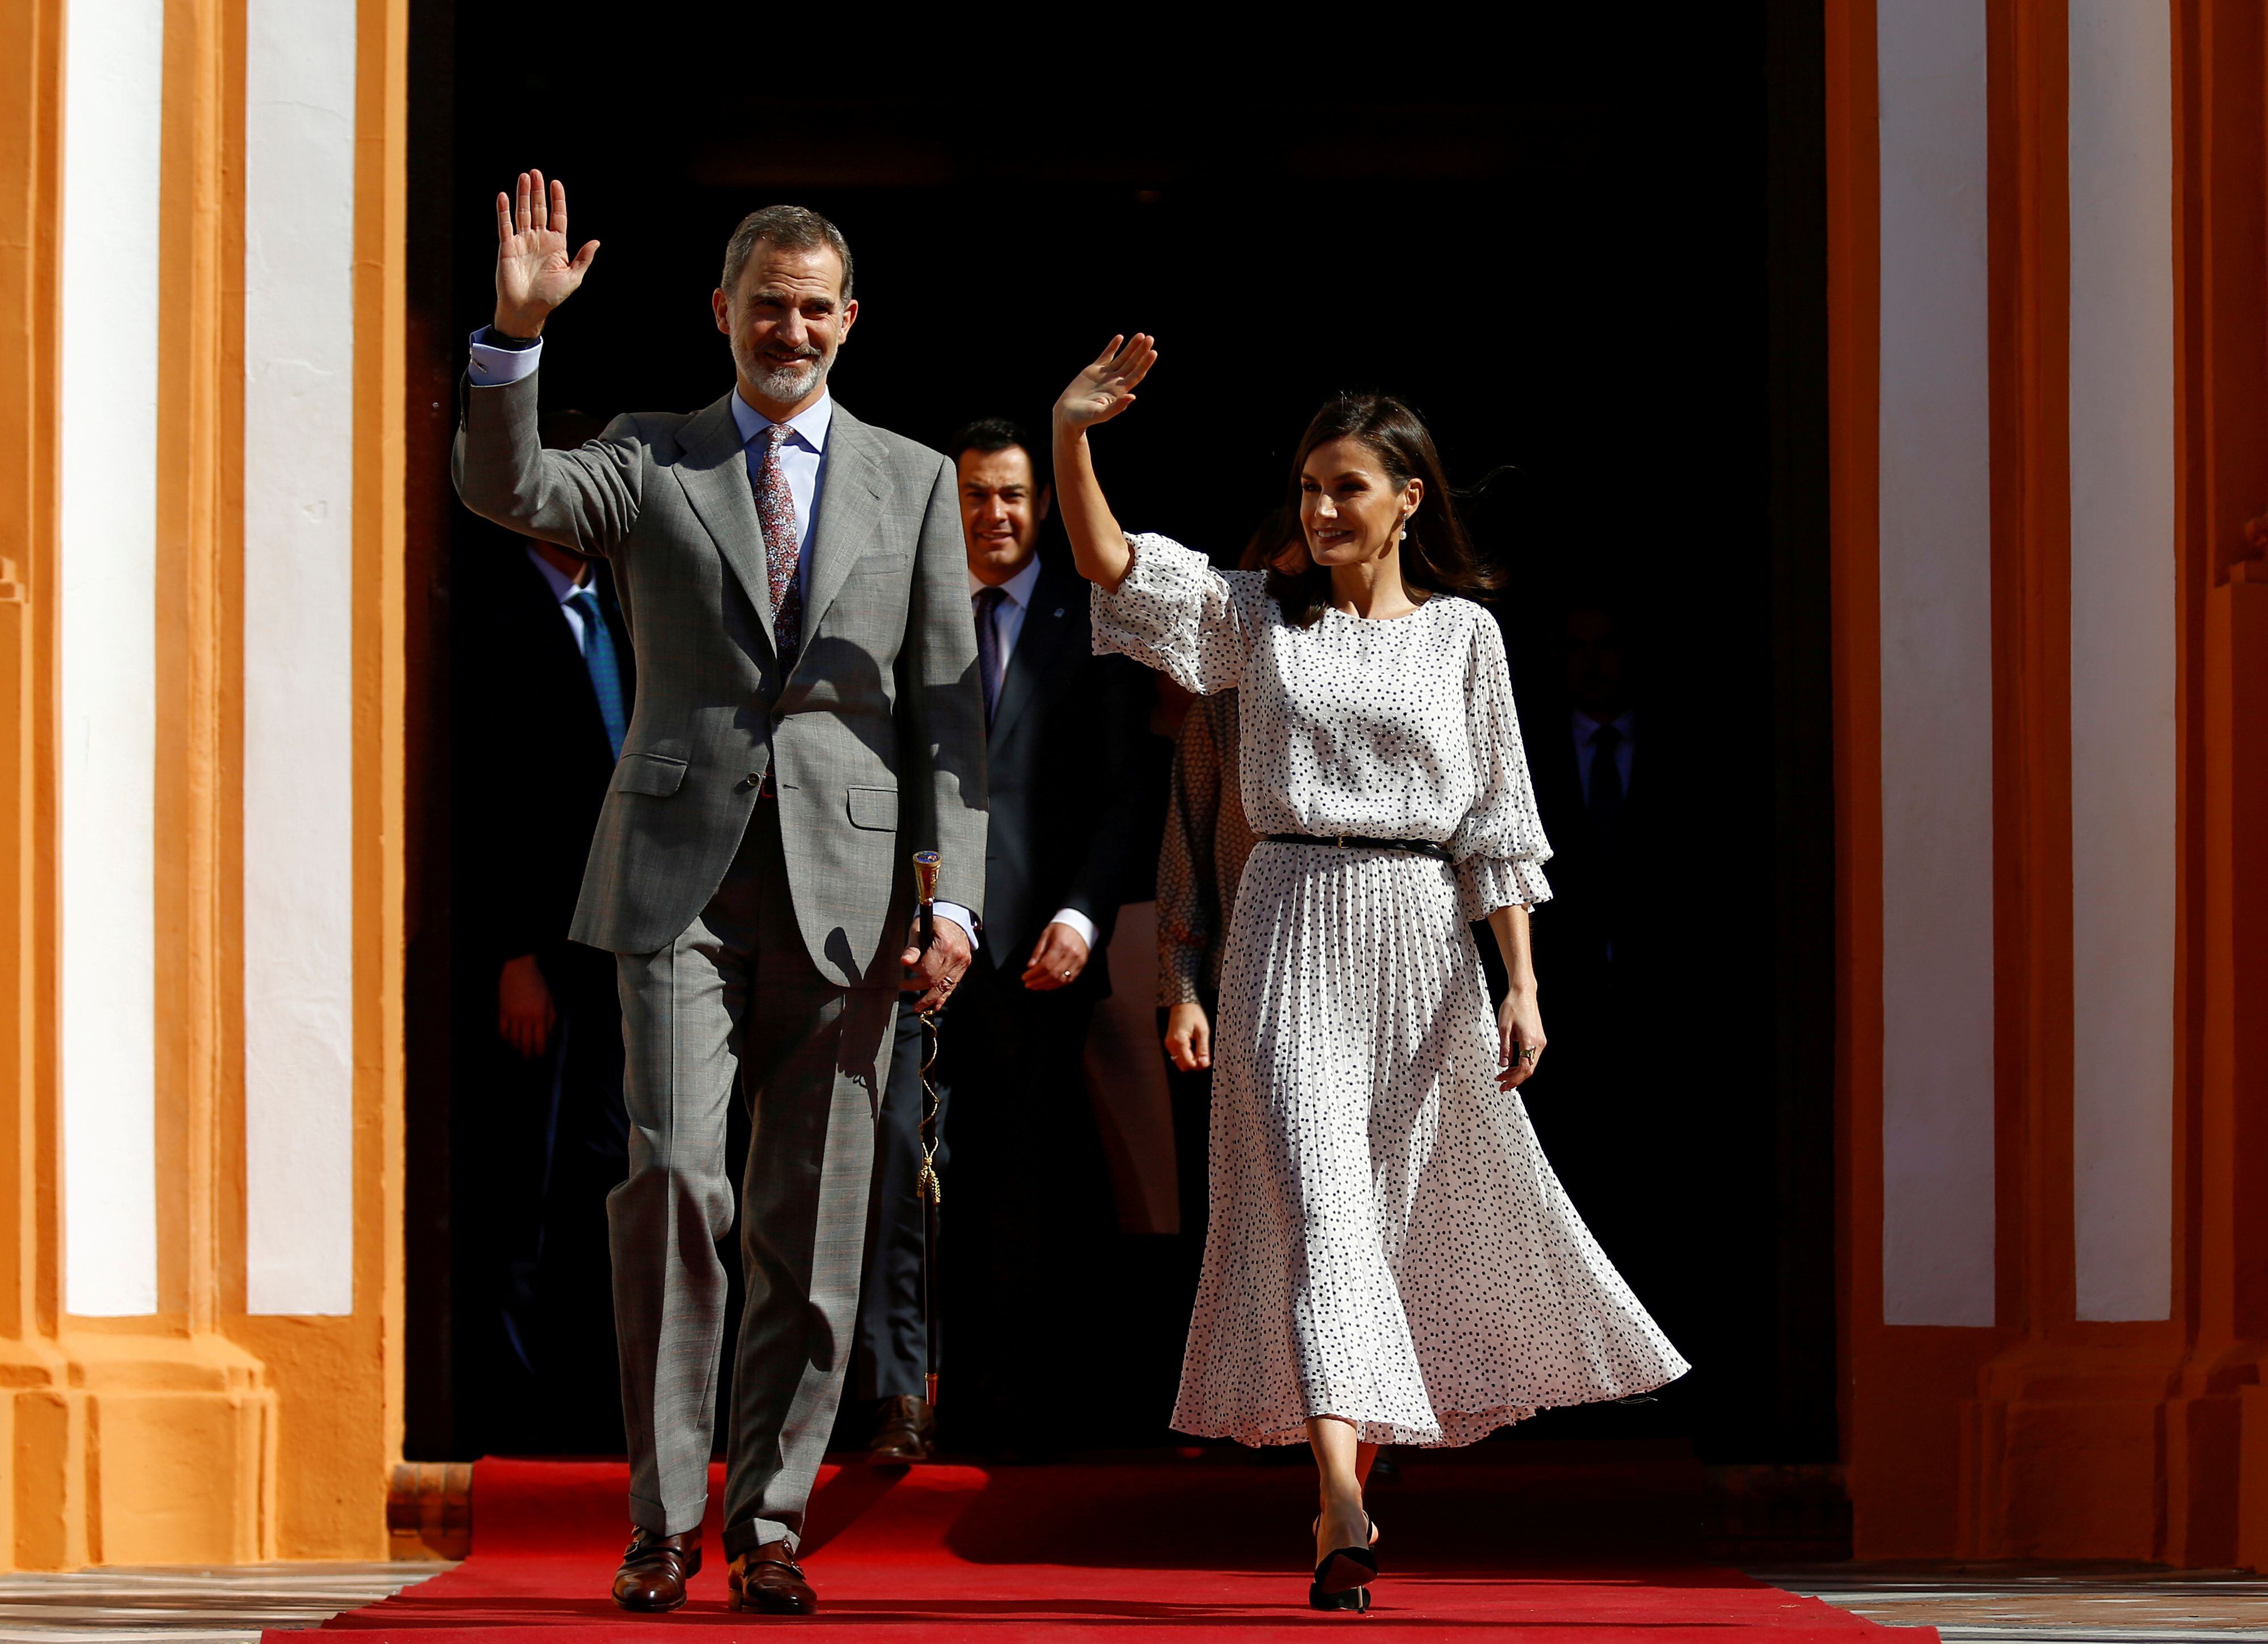 King Felipe VI and Queen Letizia of Spain wave during their visit to Almonte, southern Spain.  REUTERS/Marcelo del Pozo